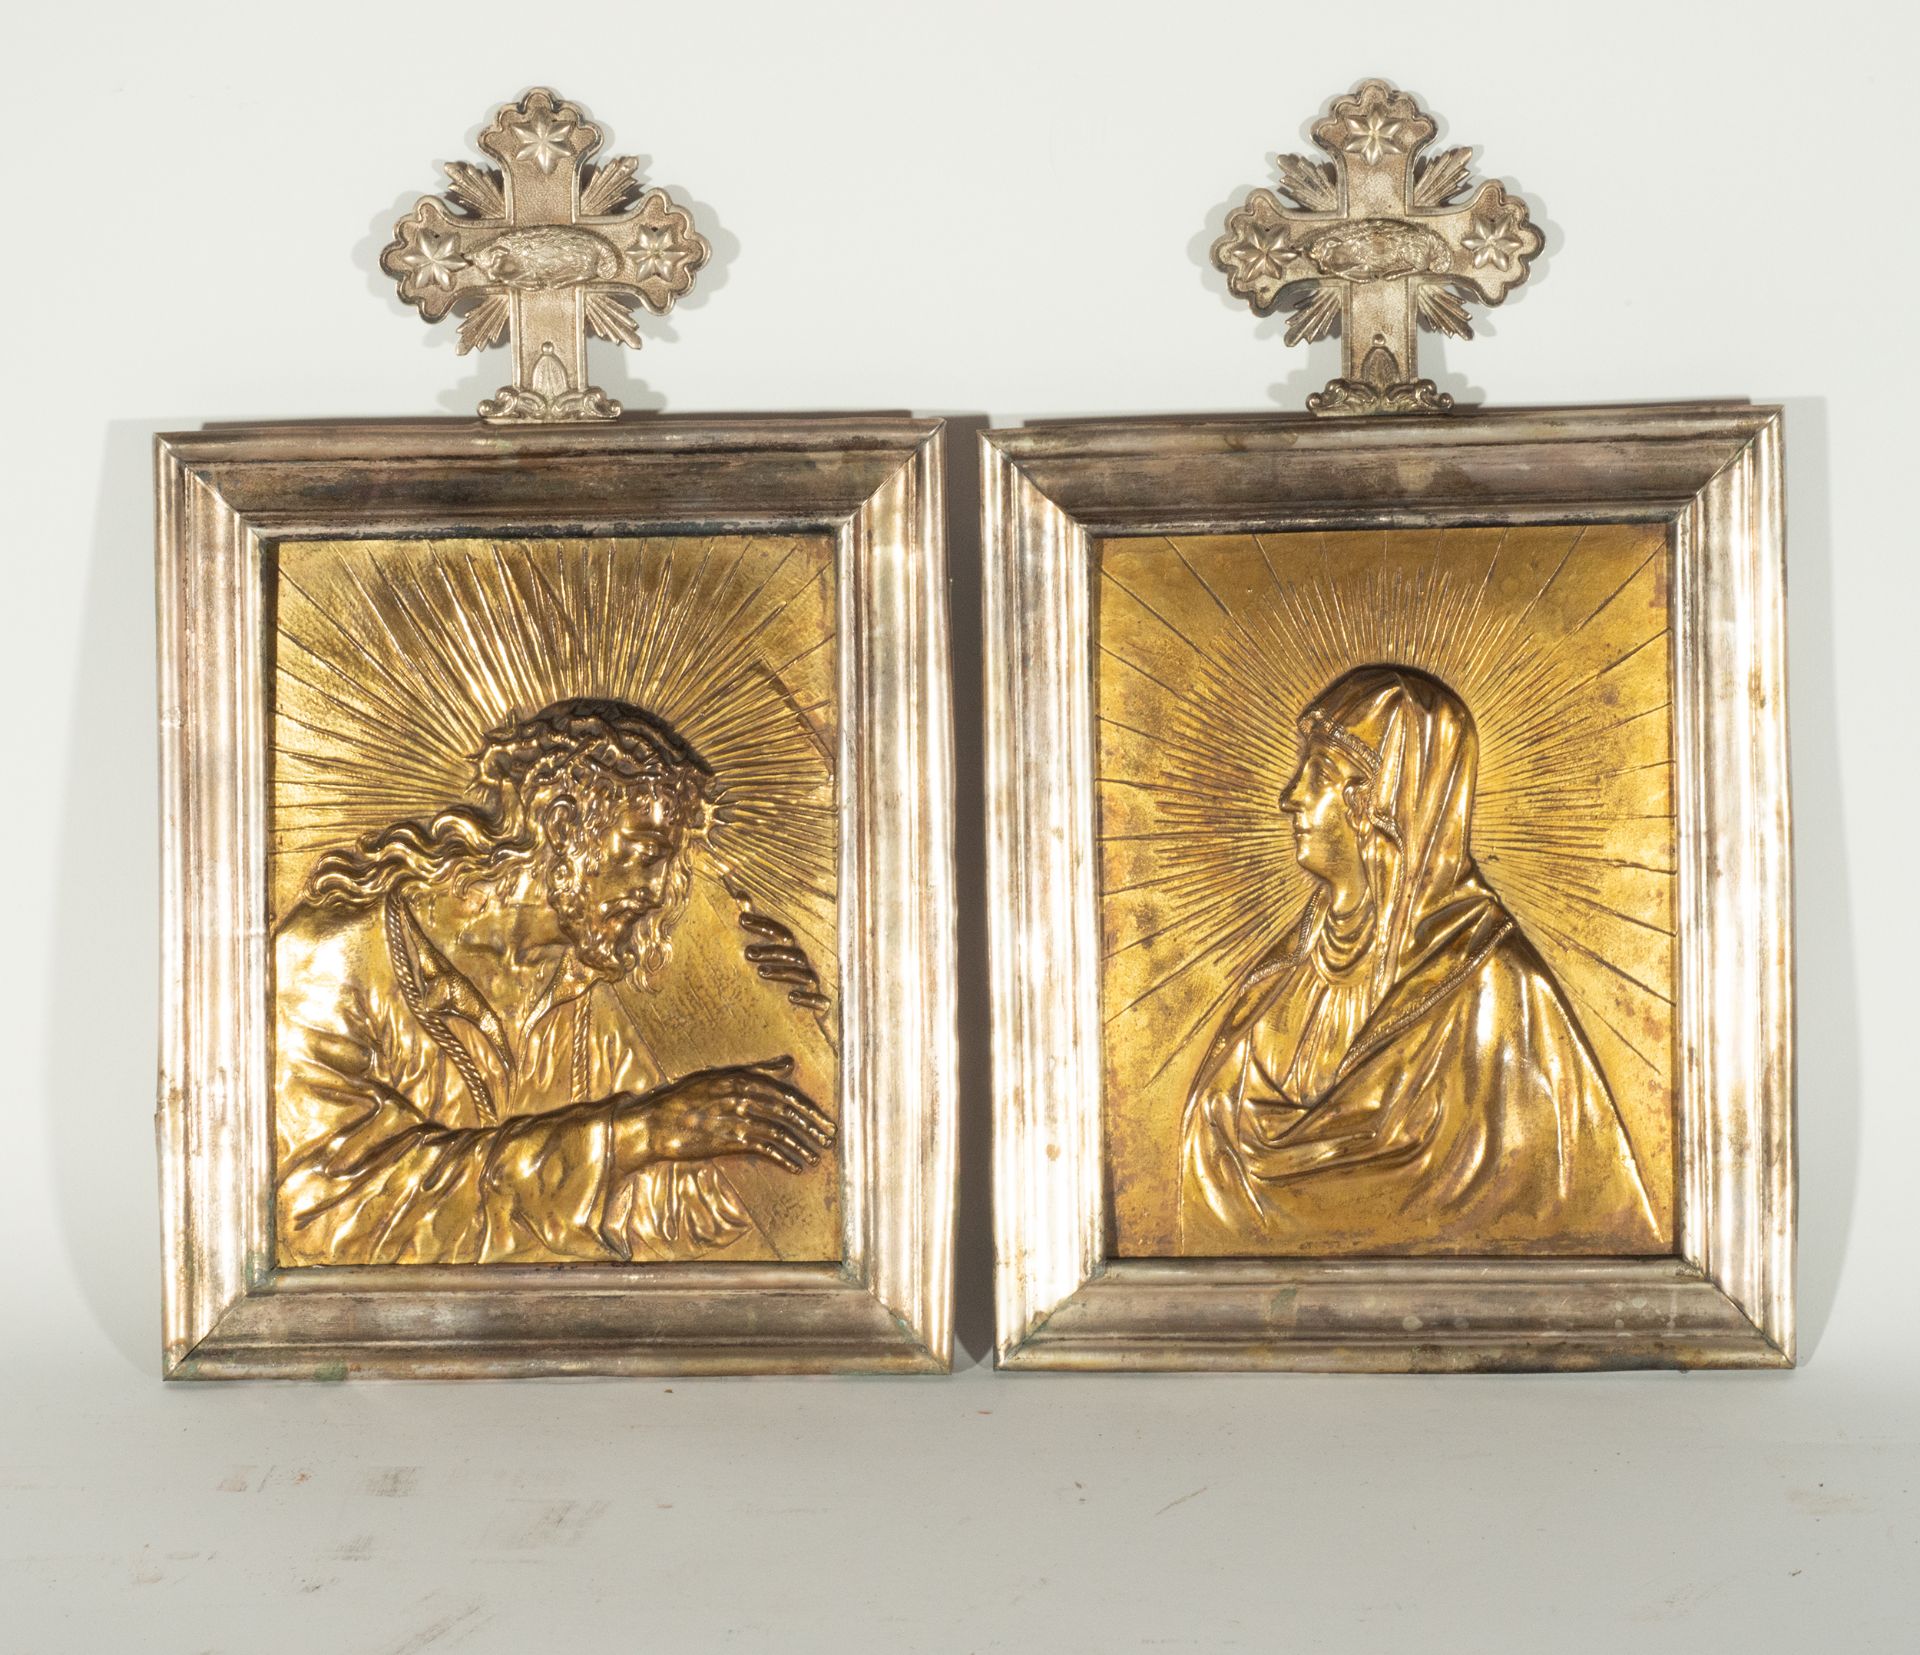 Pair of Gilt Bronze Plaques of Christ and Mary, Italo - Flemish school from the end of the 16th cent